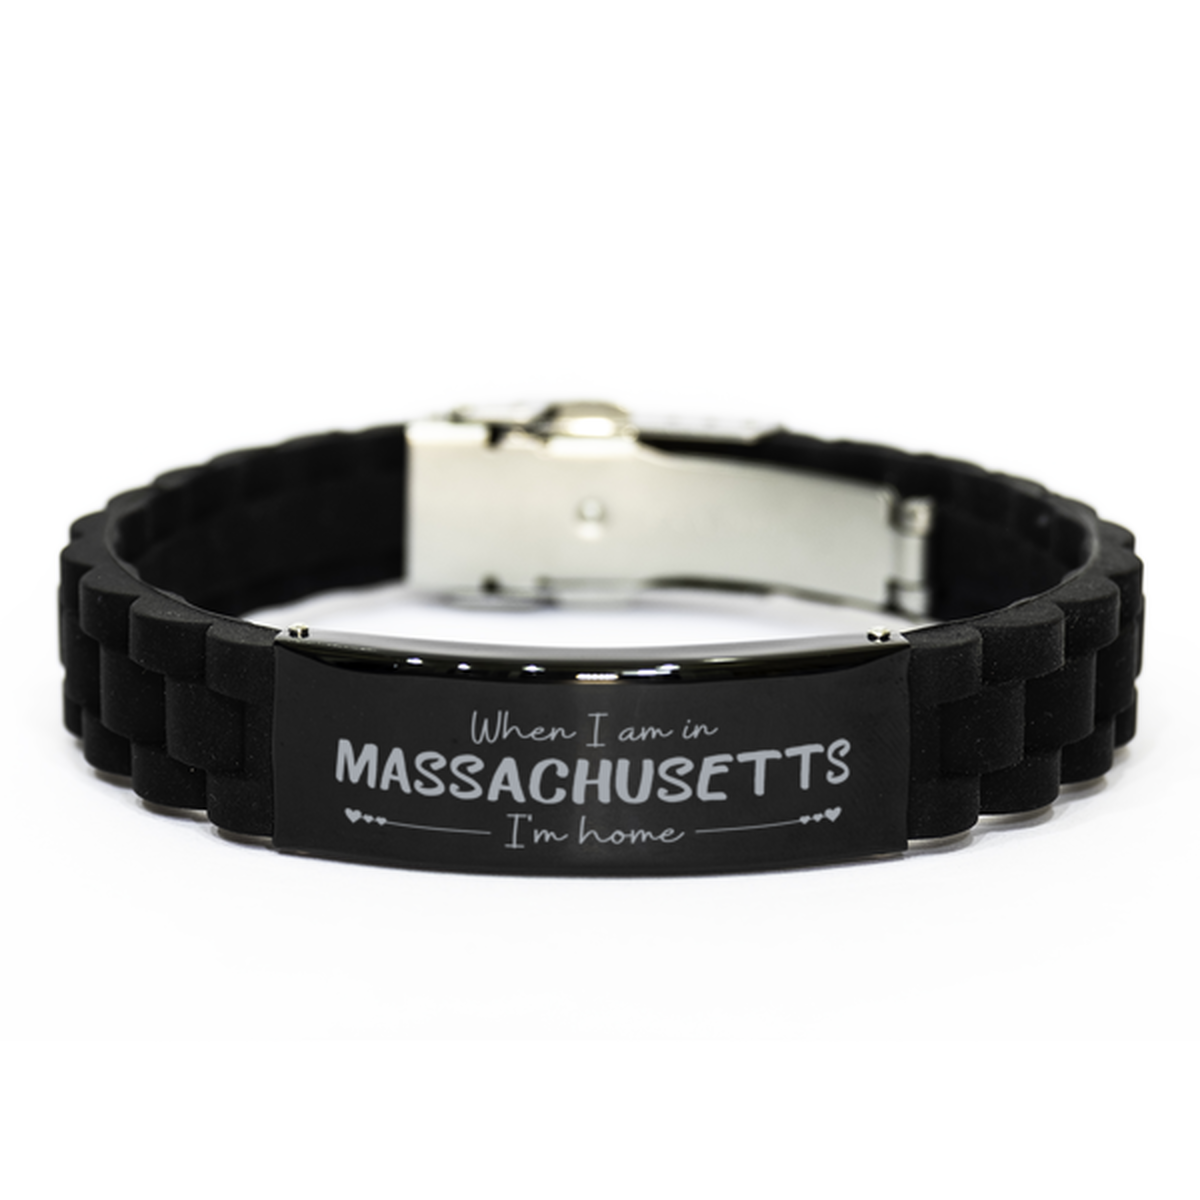 When I am in Massachusetts I'm home Black Glidelock Clasp Bracelet, Cheap Gifts For Massachusetts, State Massachusetts Birthday Gifts for Friends Coworker